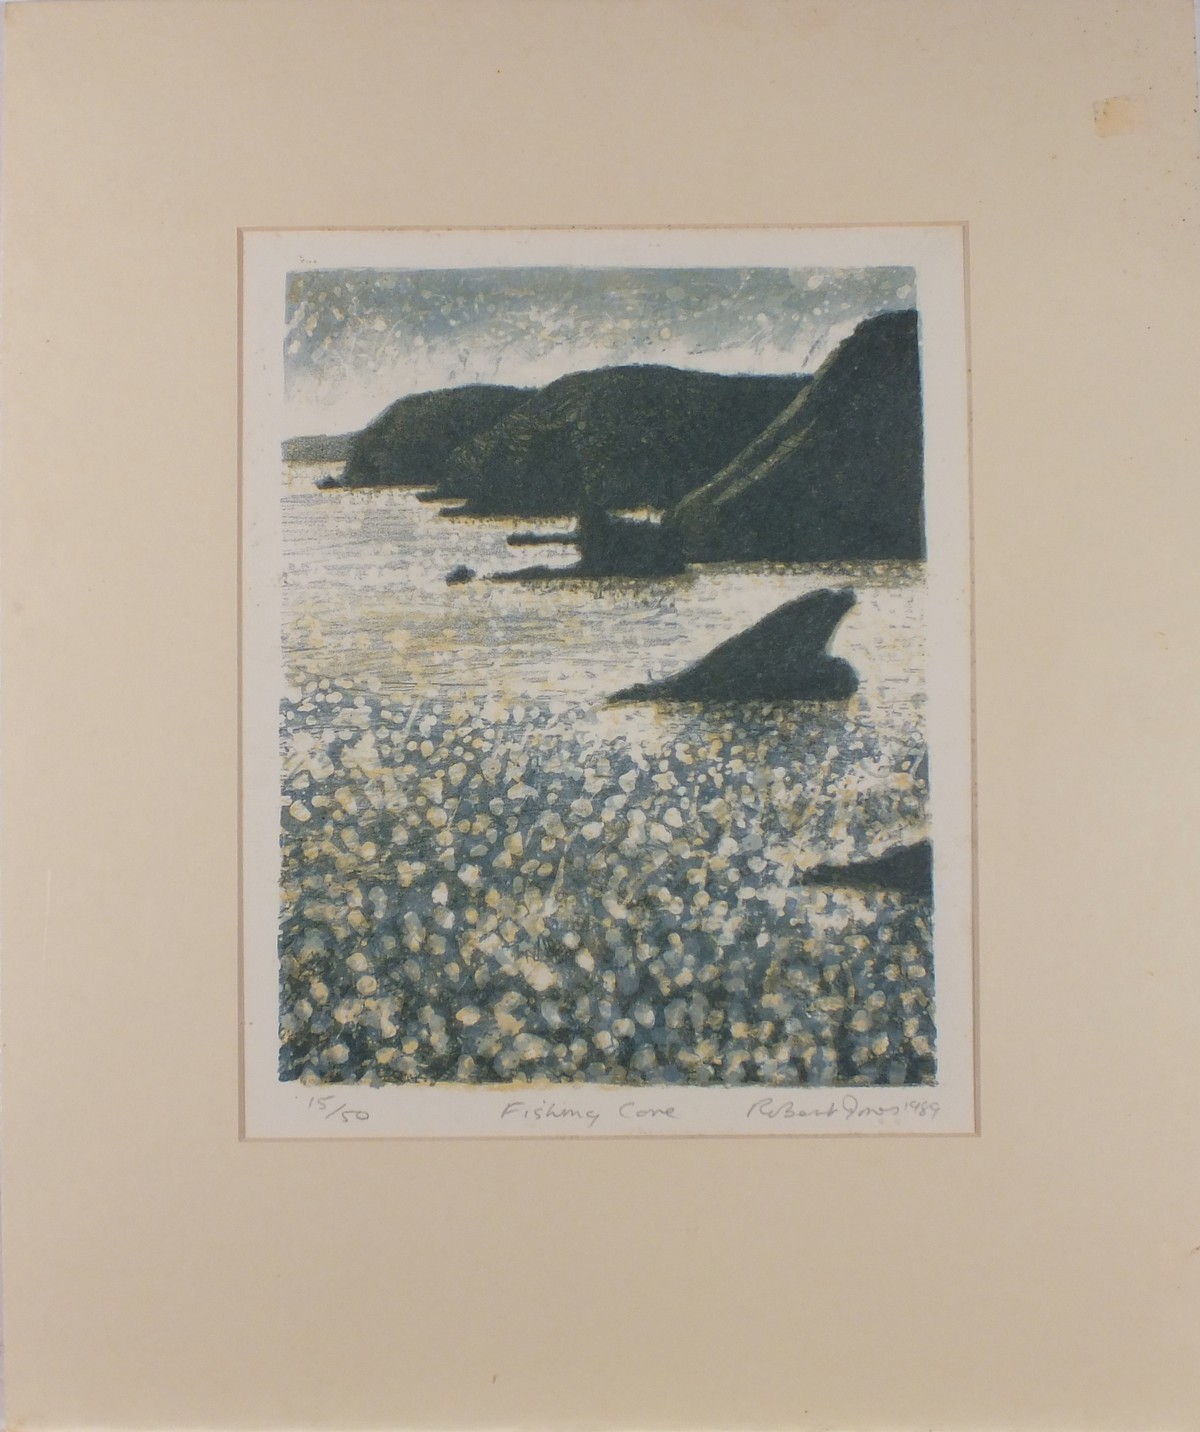 Robert JONES (British b. 1943) Fishing Cove, Limited edition print, Signed and dated 1989 lower - Image 2 of 2